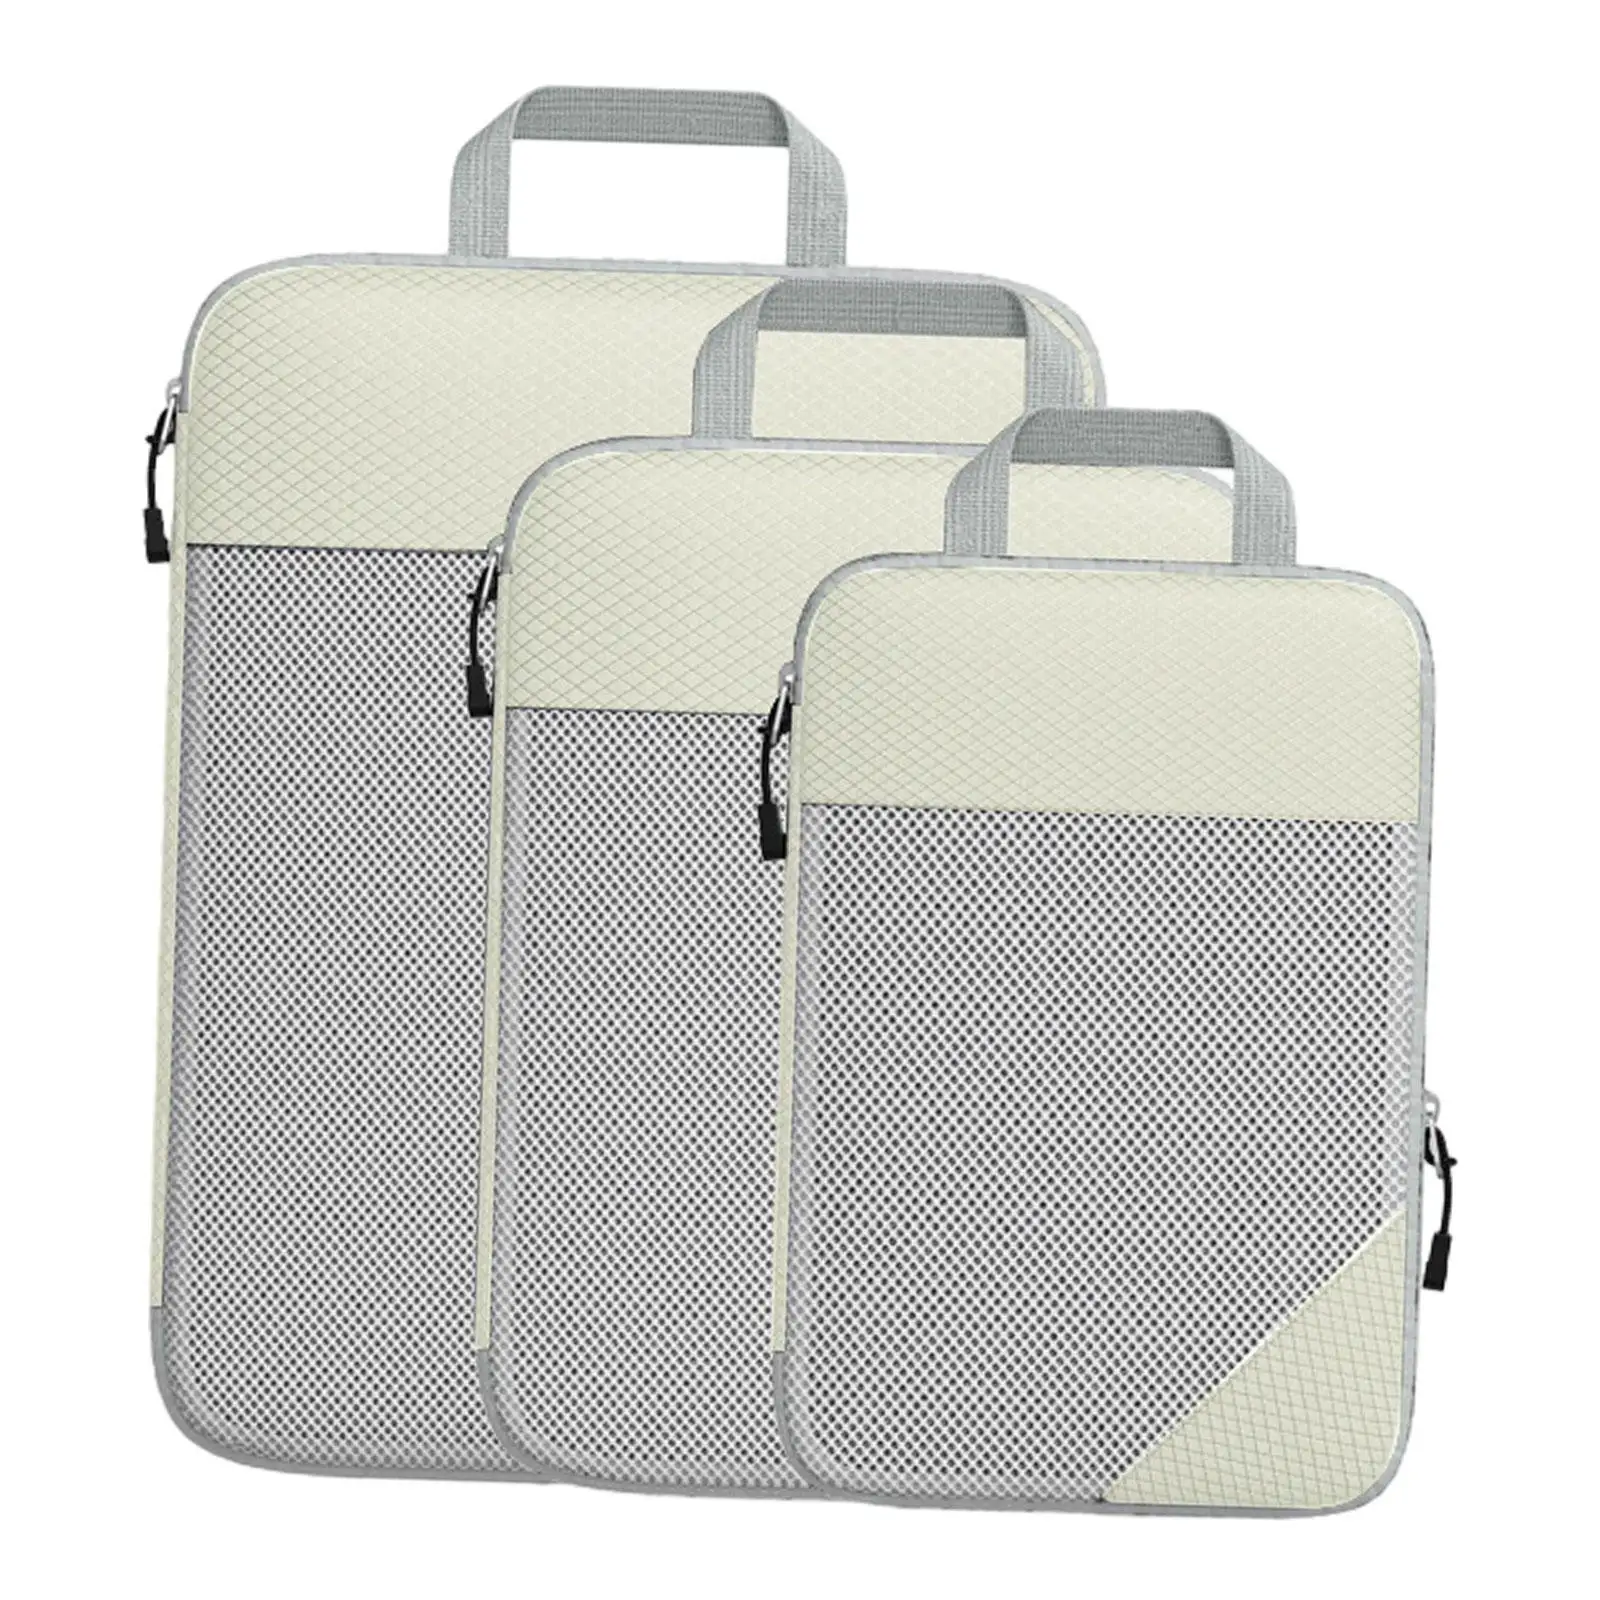 3 Pcs Compression Packing Cubes Luggage Packing Organizer Portable Travel